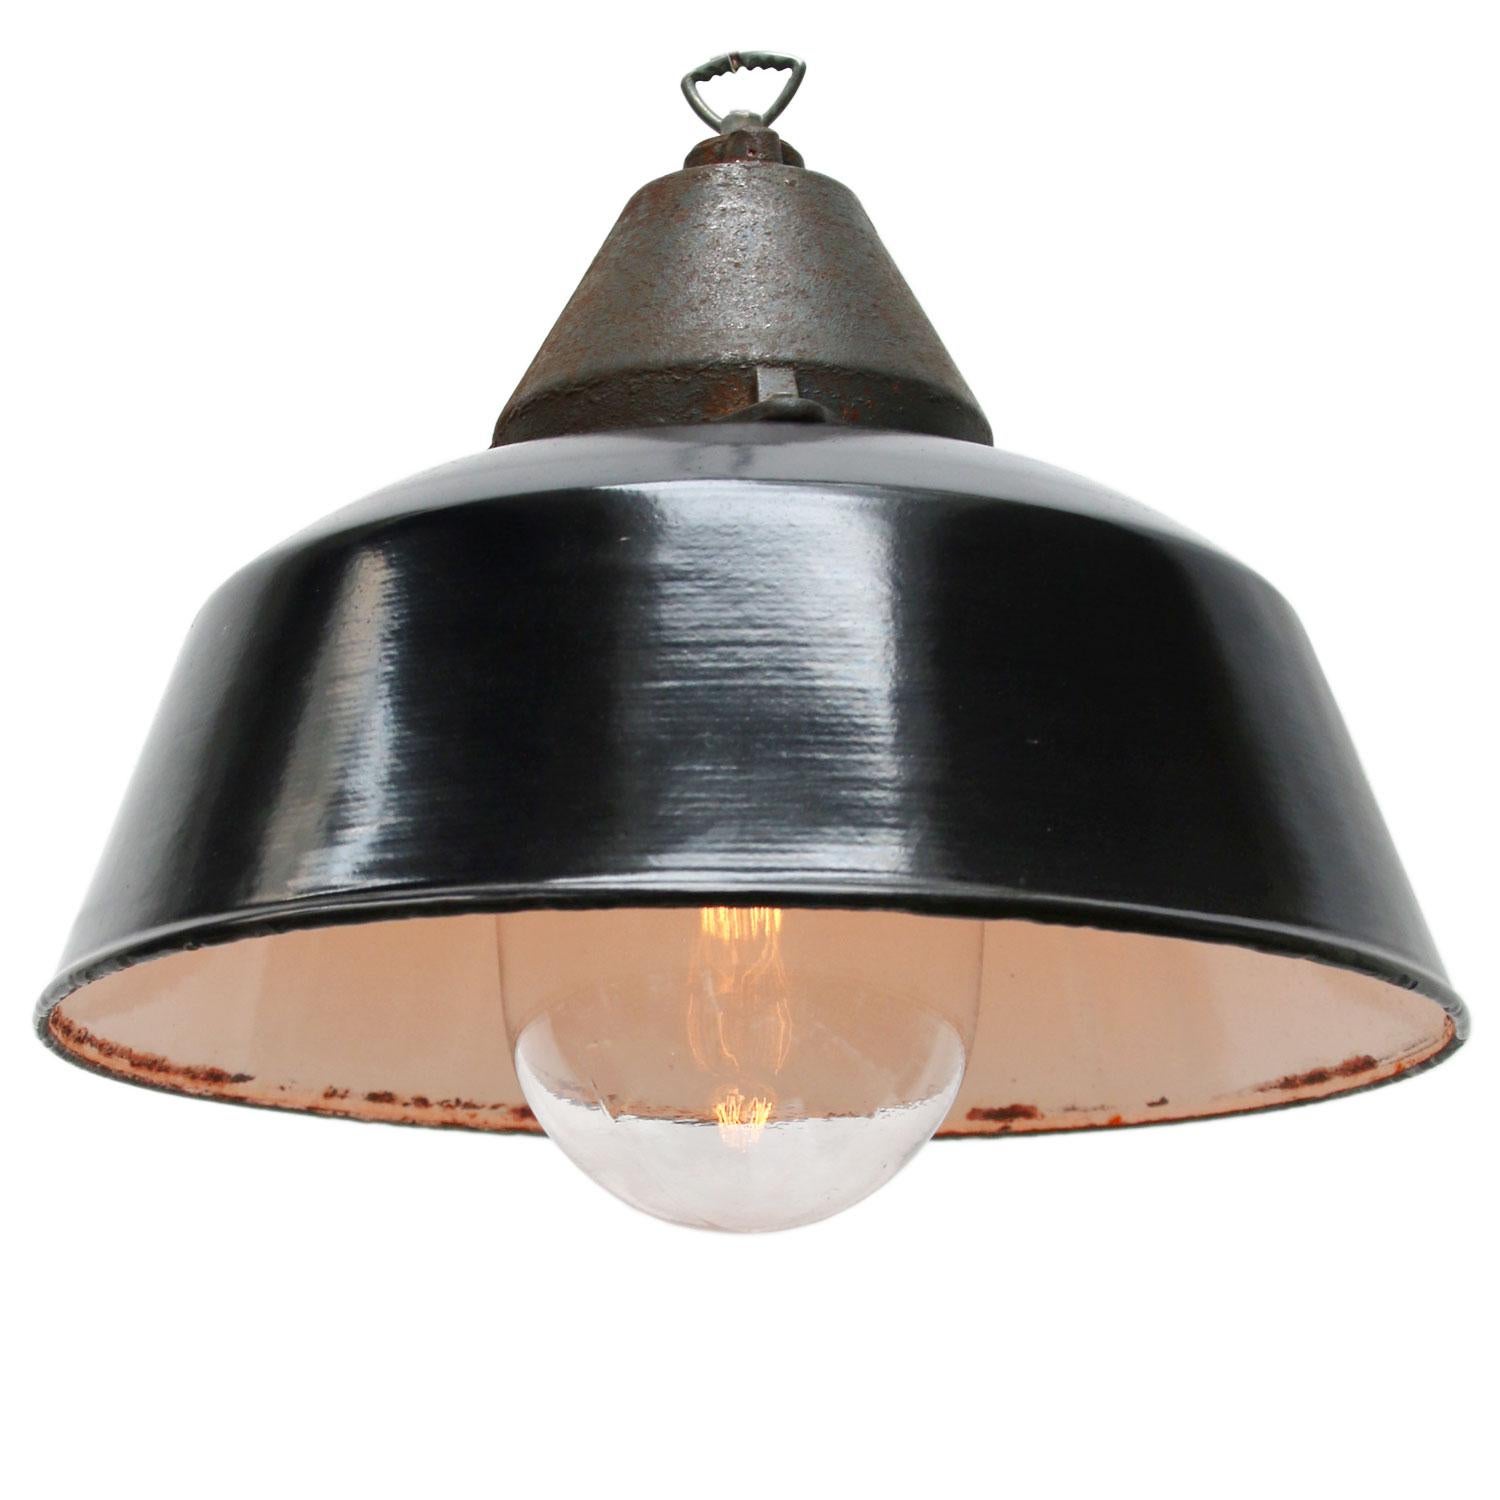 Factory hanging lamp. Black enamel. White interior.
Clear glass. Cast iron top.

Measurement: Weight 5.5 kg / 12.1 lb

All lamps have been made suitable by international standards for incandescent light bulbs, energy-efficient and LED bulbs.